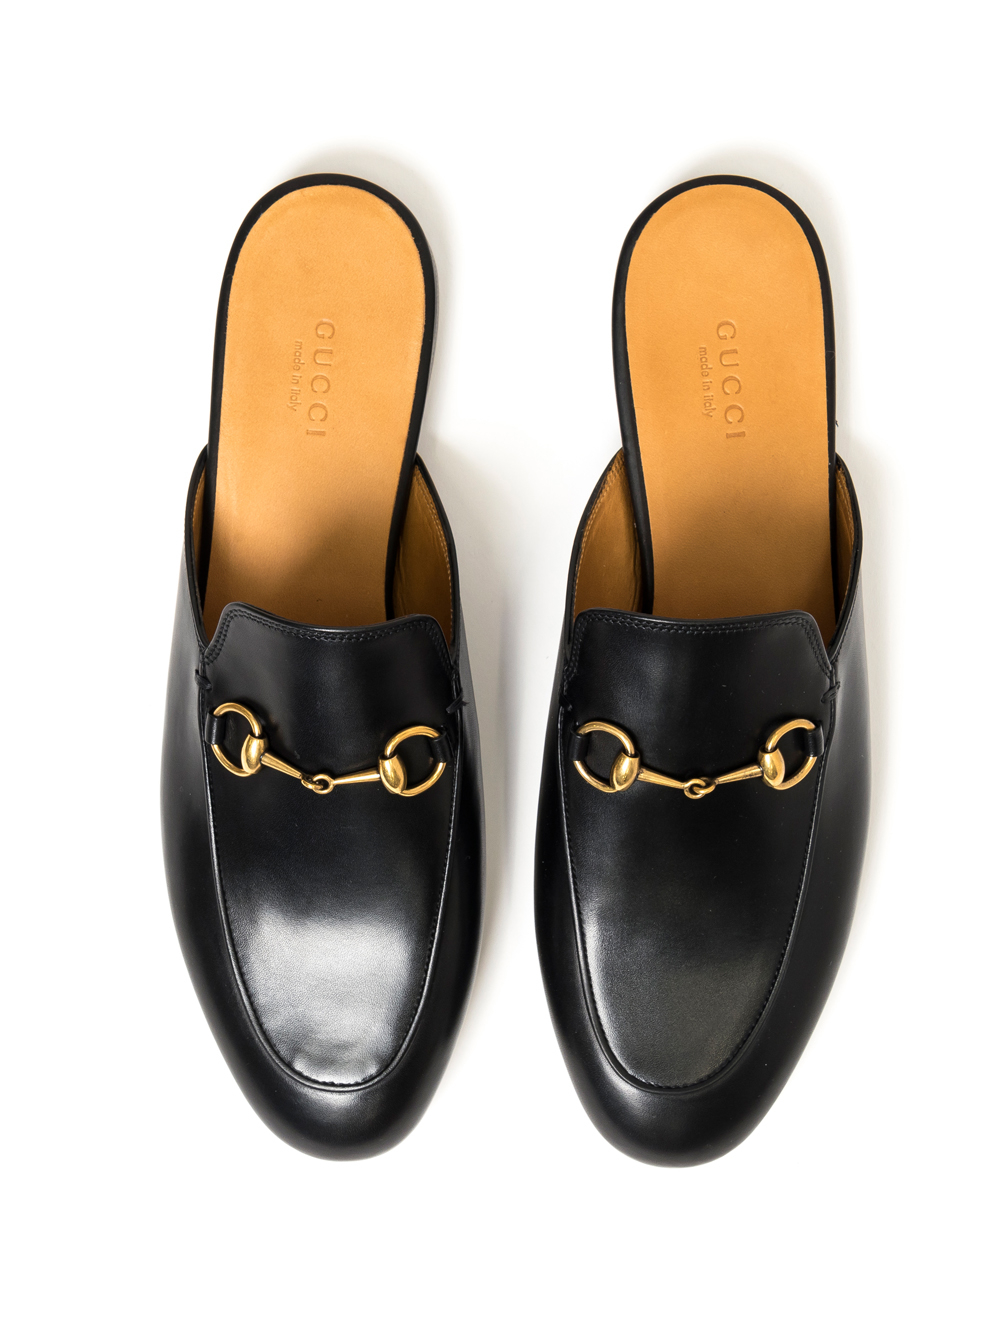 Gucci Princetown Leather Slipper in Black - Lyst